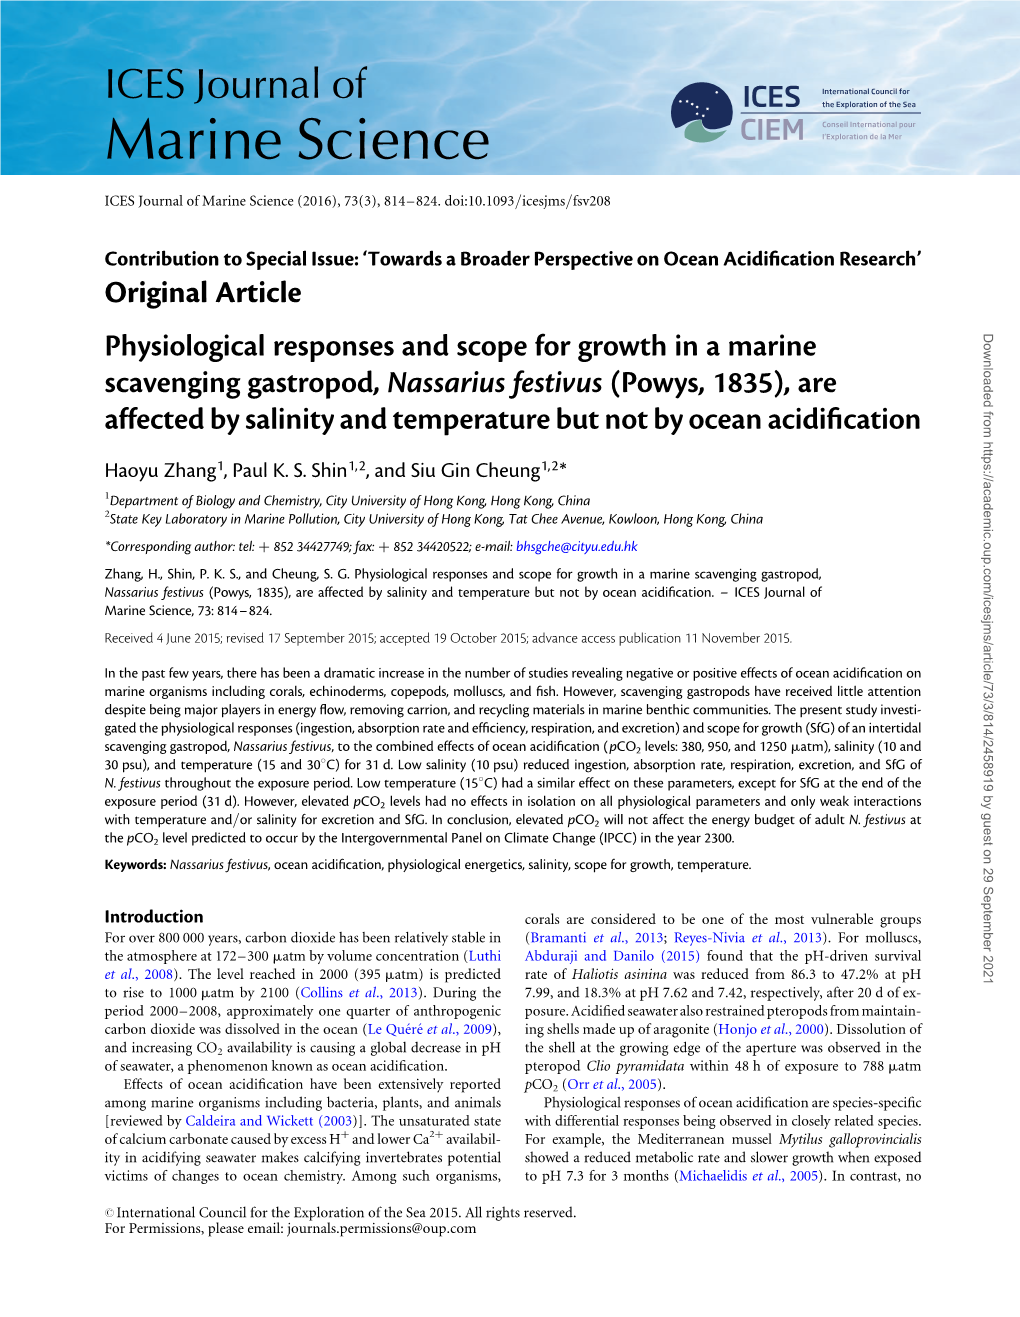 Physiological Responses and Scope for Growth in a Marine Scavenging